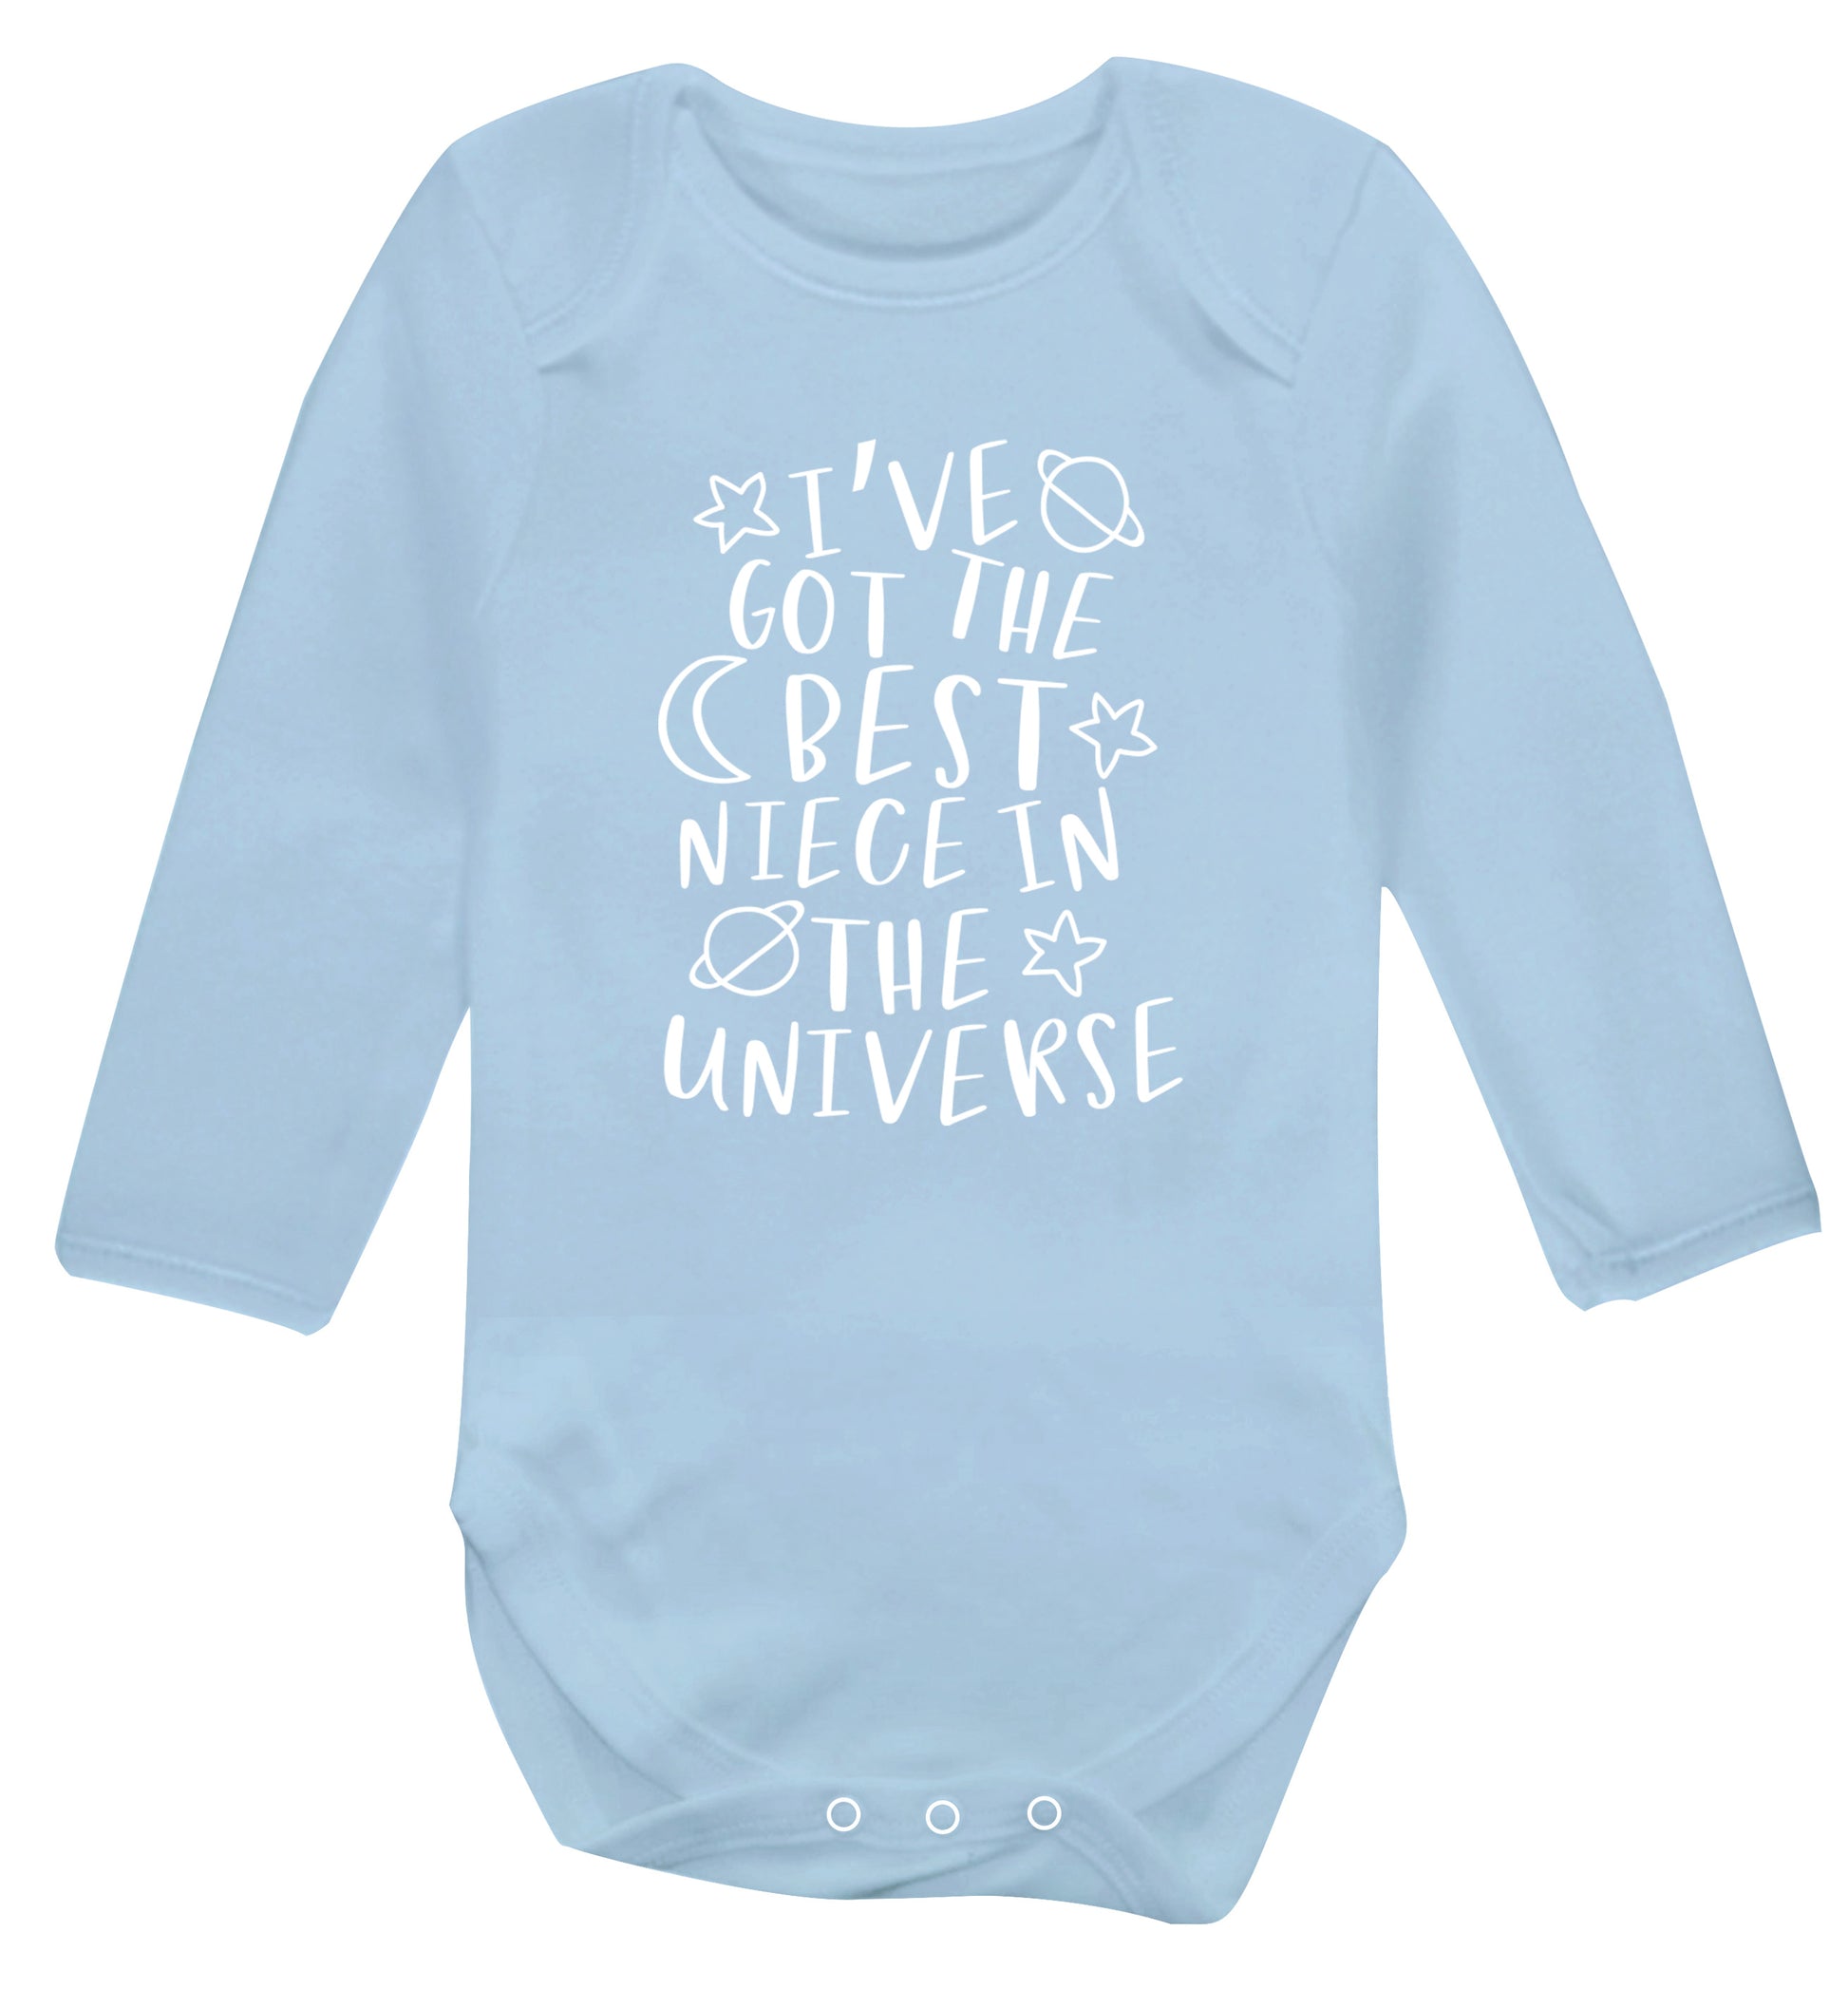 I've got the best niece in the universe Baby Vest long sleeved pale blue 6-12 months